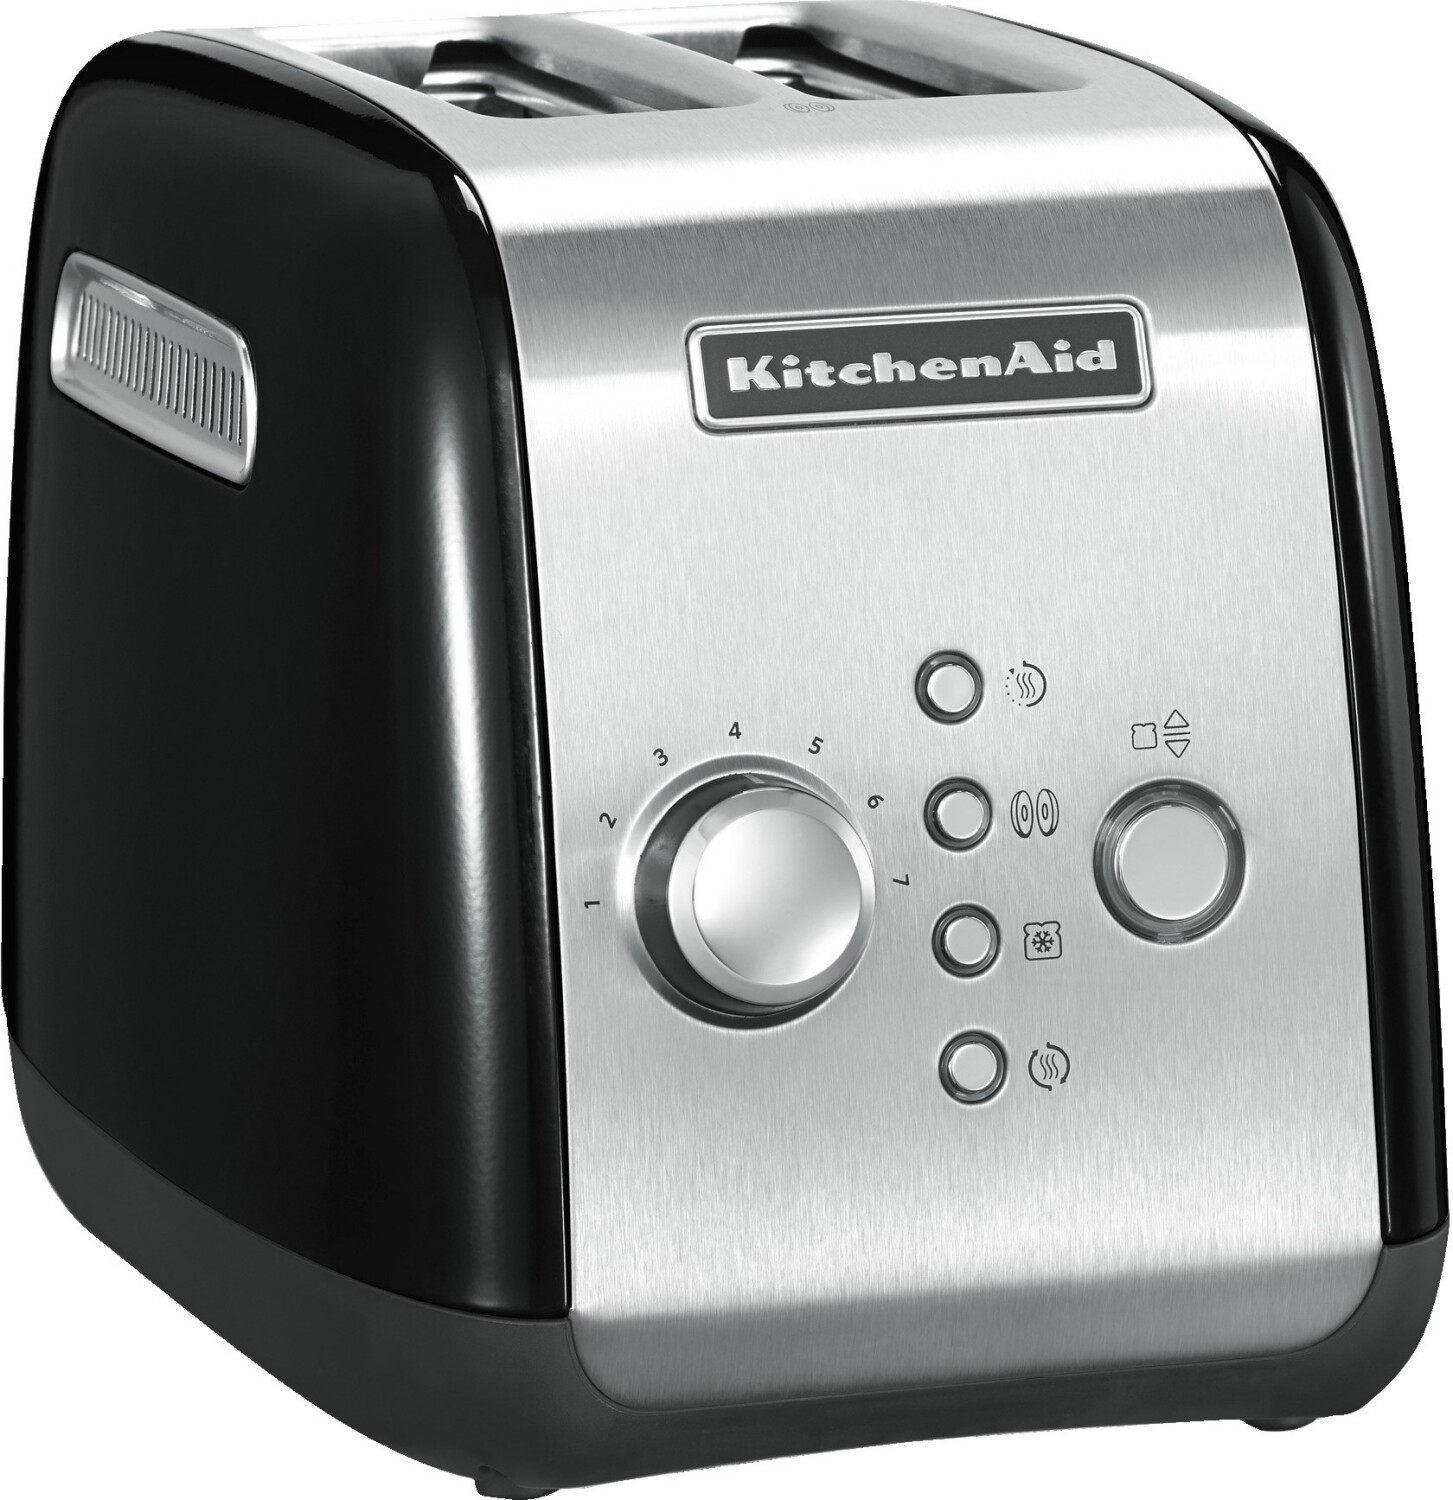 Buy KitchenAid 5KMT221 from £84.99 (Today) – Best Deals on